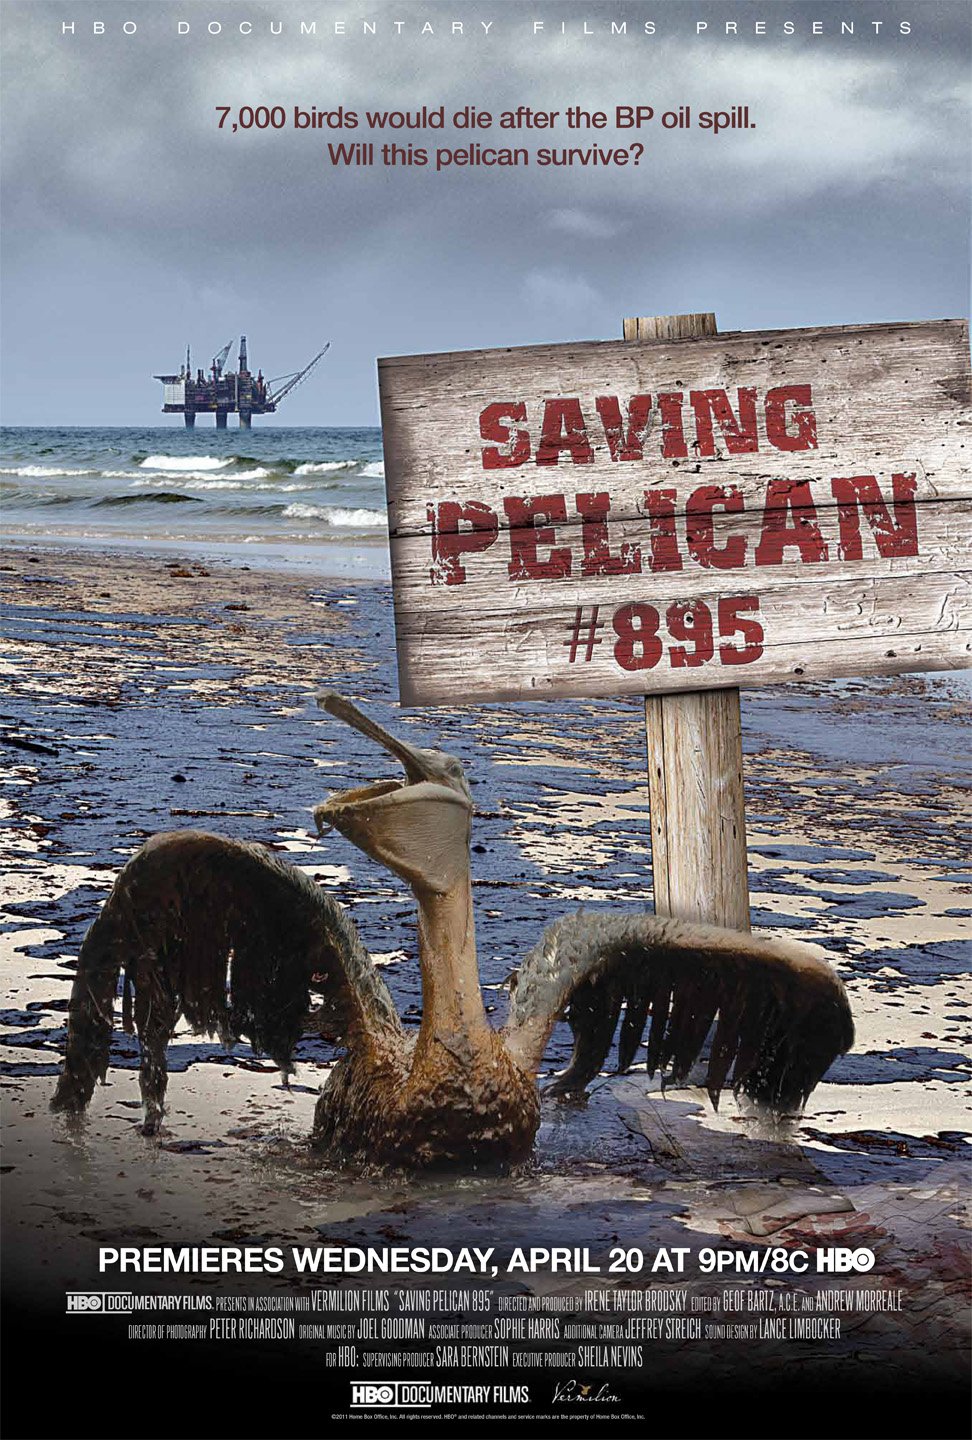 Extra Large TV Poster Image for Saving Pelican 895 